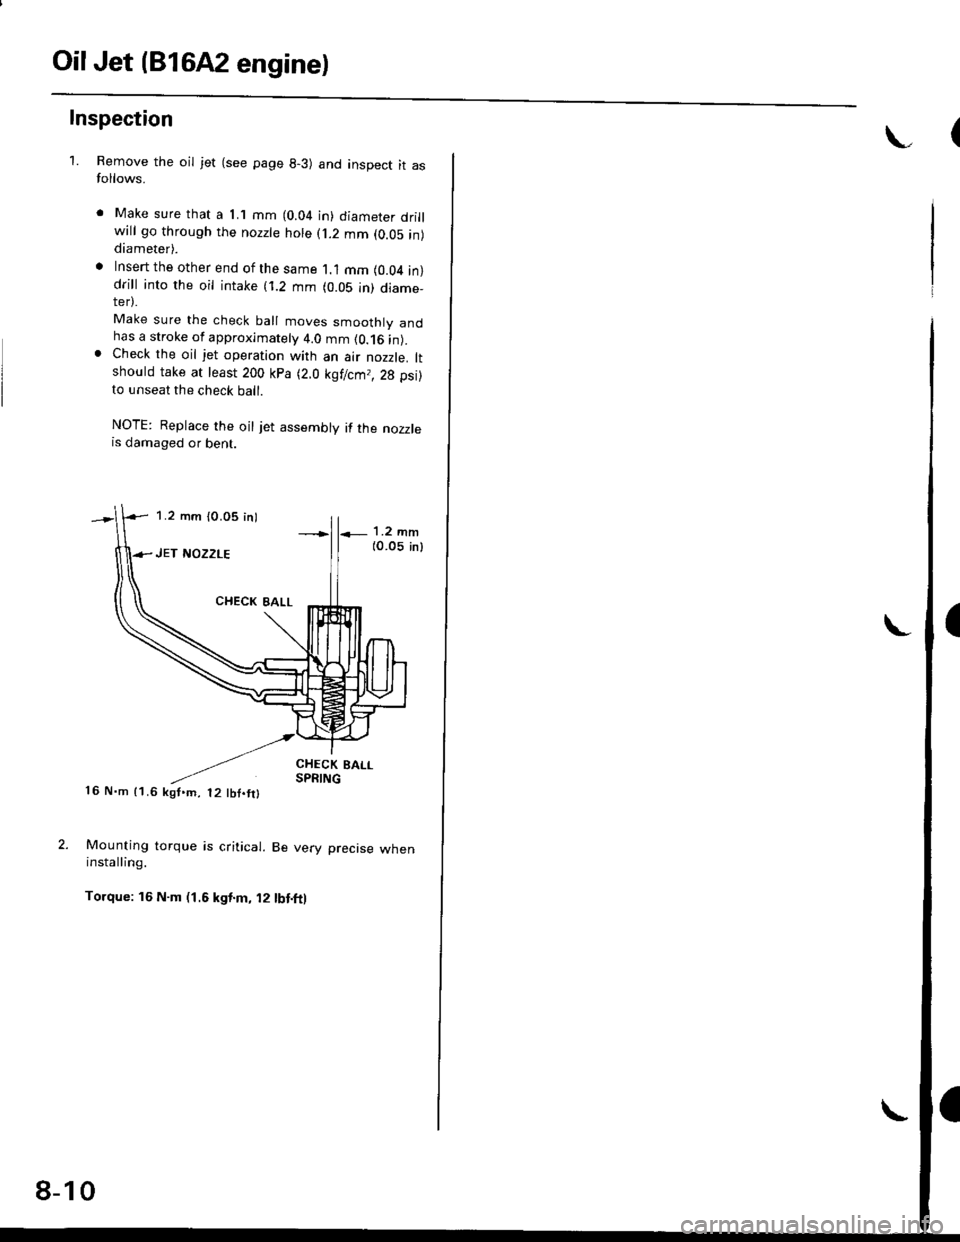 HONDA CIVIC 1997 6.G Owners Manual OilJet (B1642 engine)
Inspection
1.Remove the oil jet (see page 8-3) and inspect it asfollows.
Make sure that a 1.1 mm (0.04 in) diameter drillwill go through the nozzte hole (j.2 mm (0.05 in)diameter